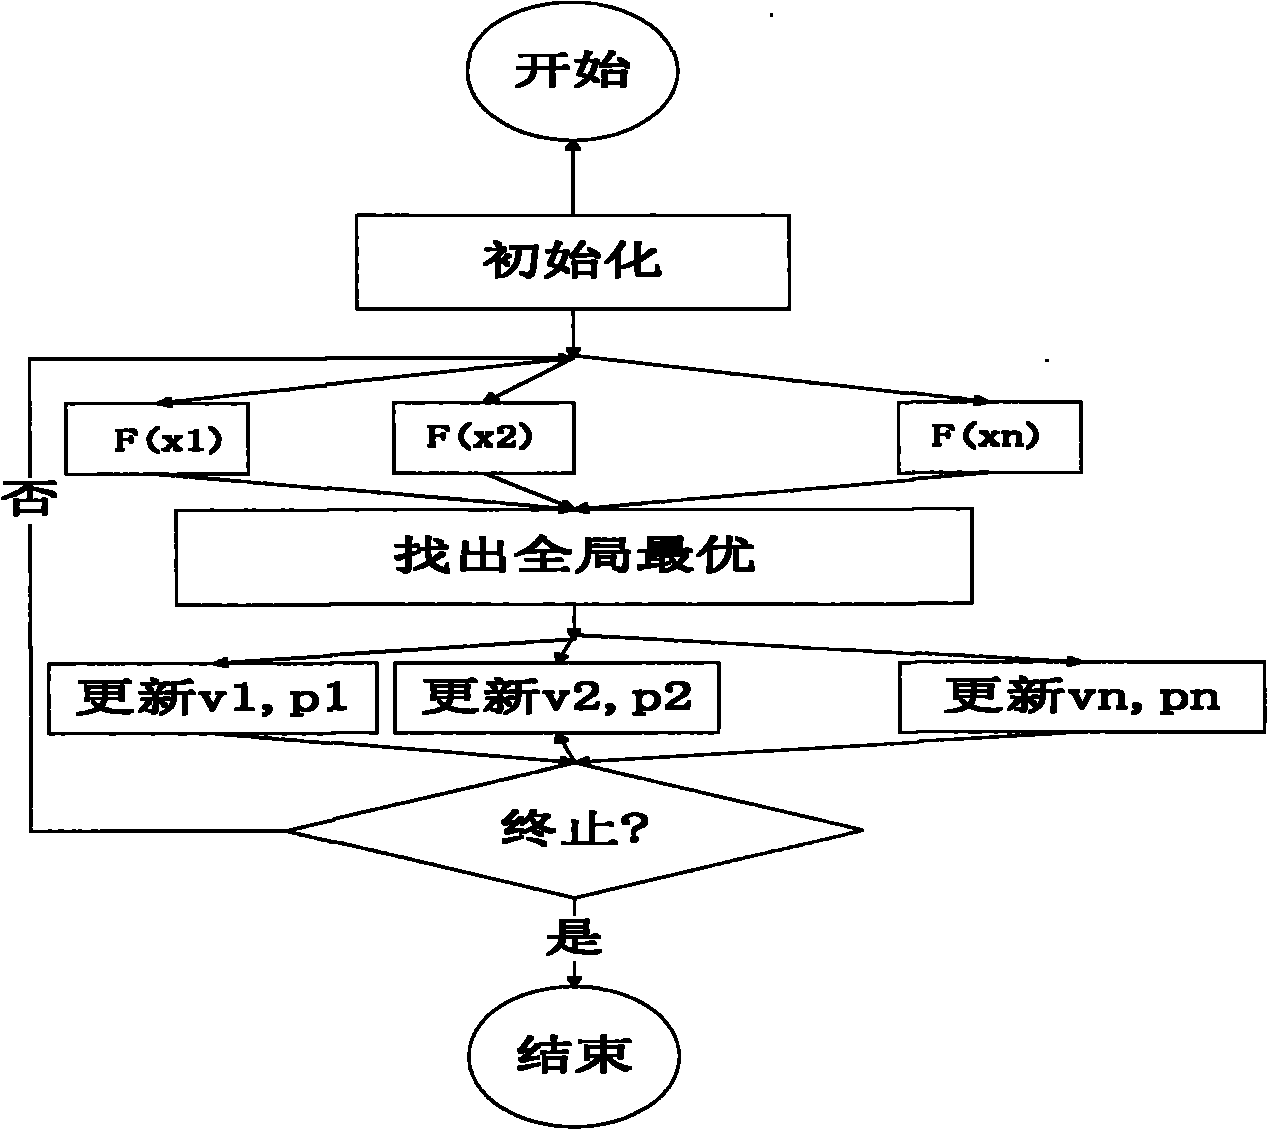 Method for parallel execution of particle swarm optimization algorithm on multiple computers